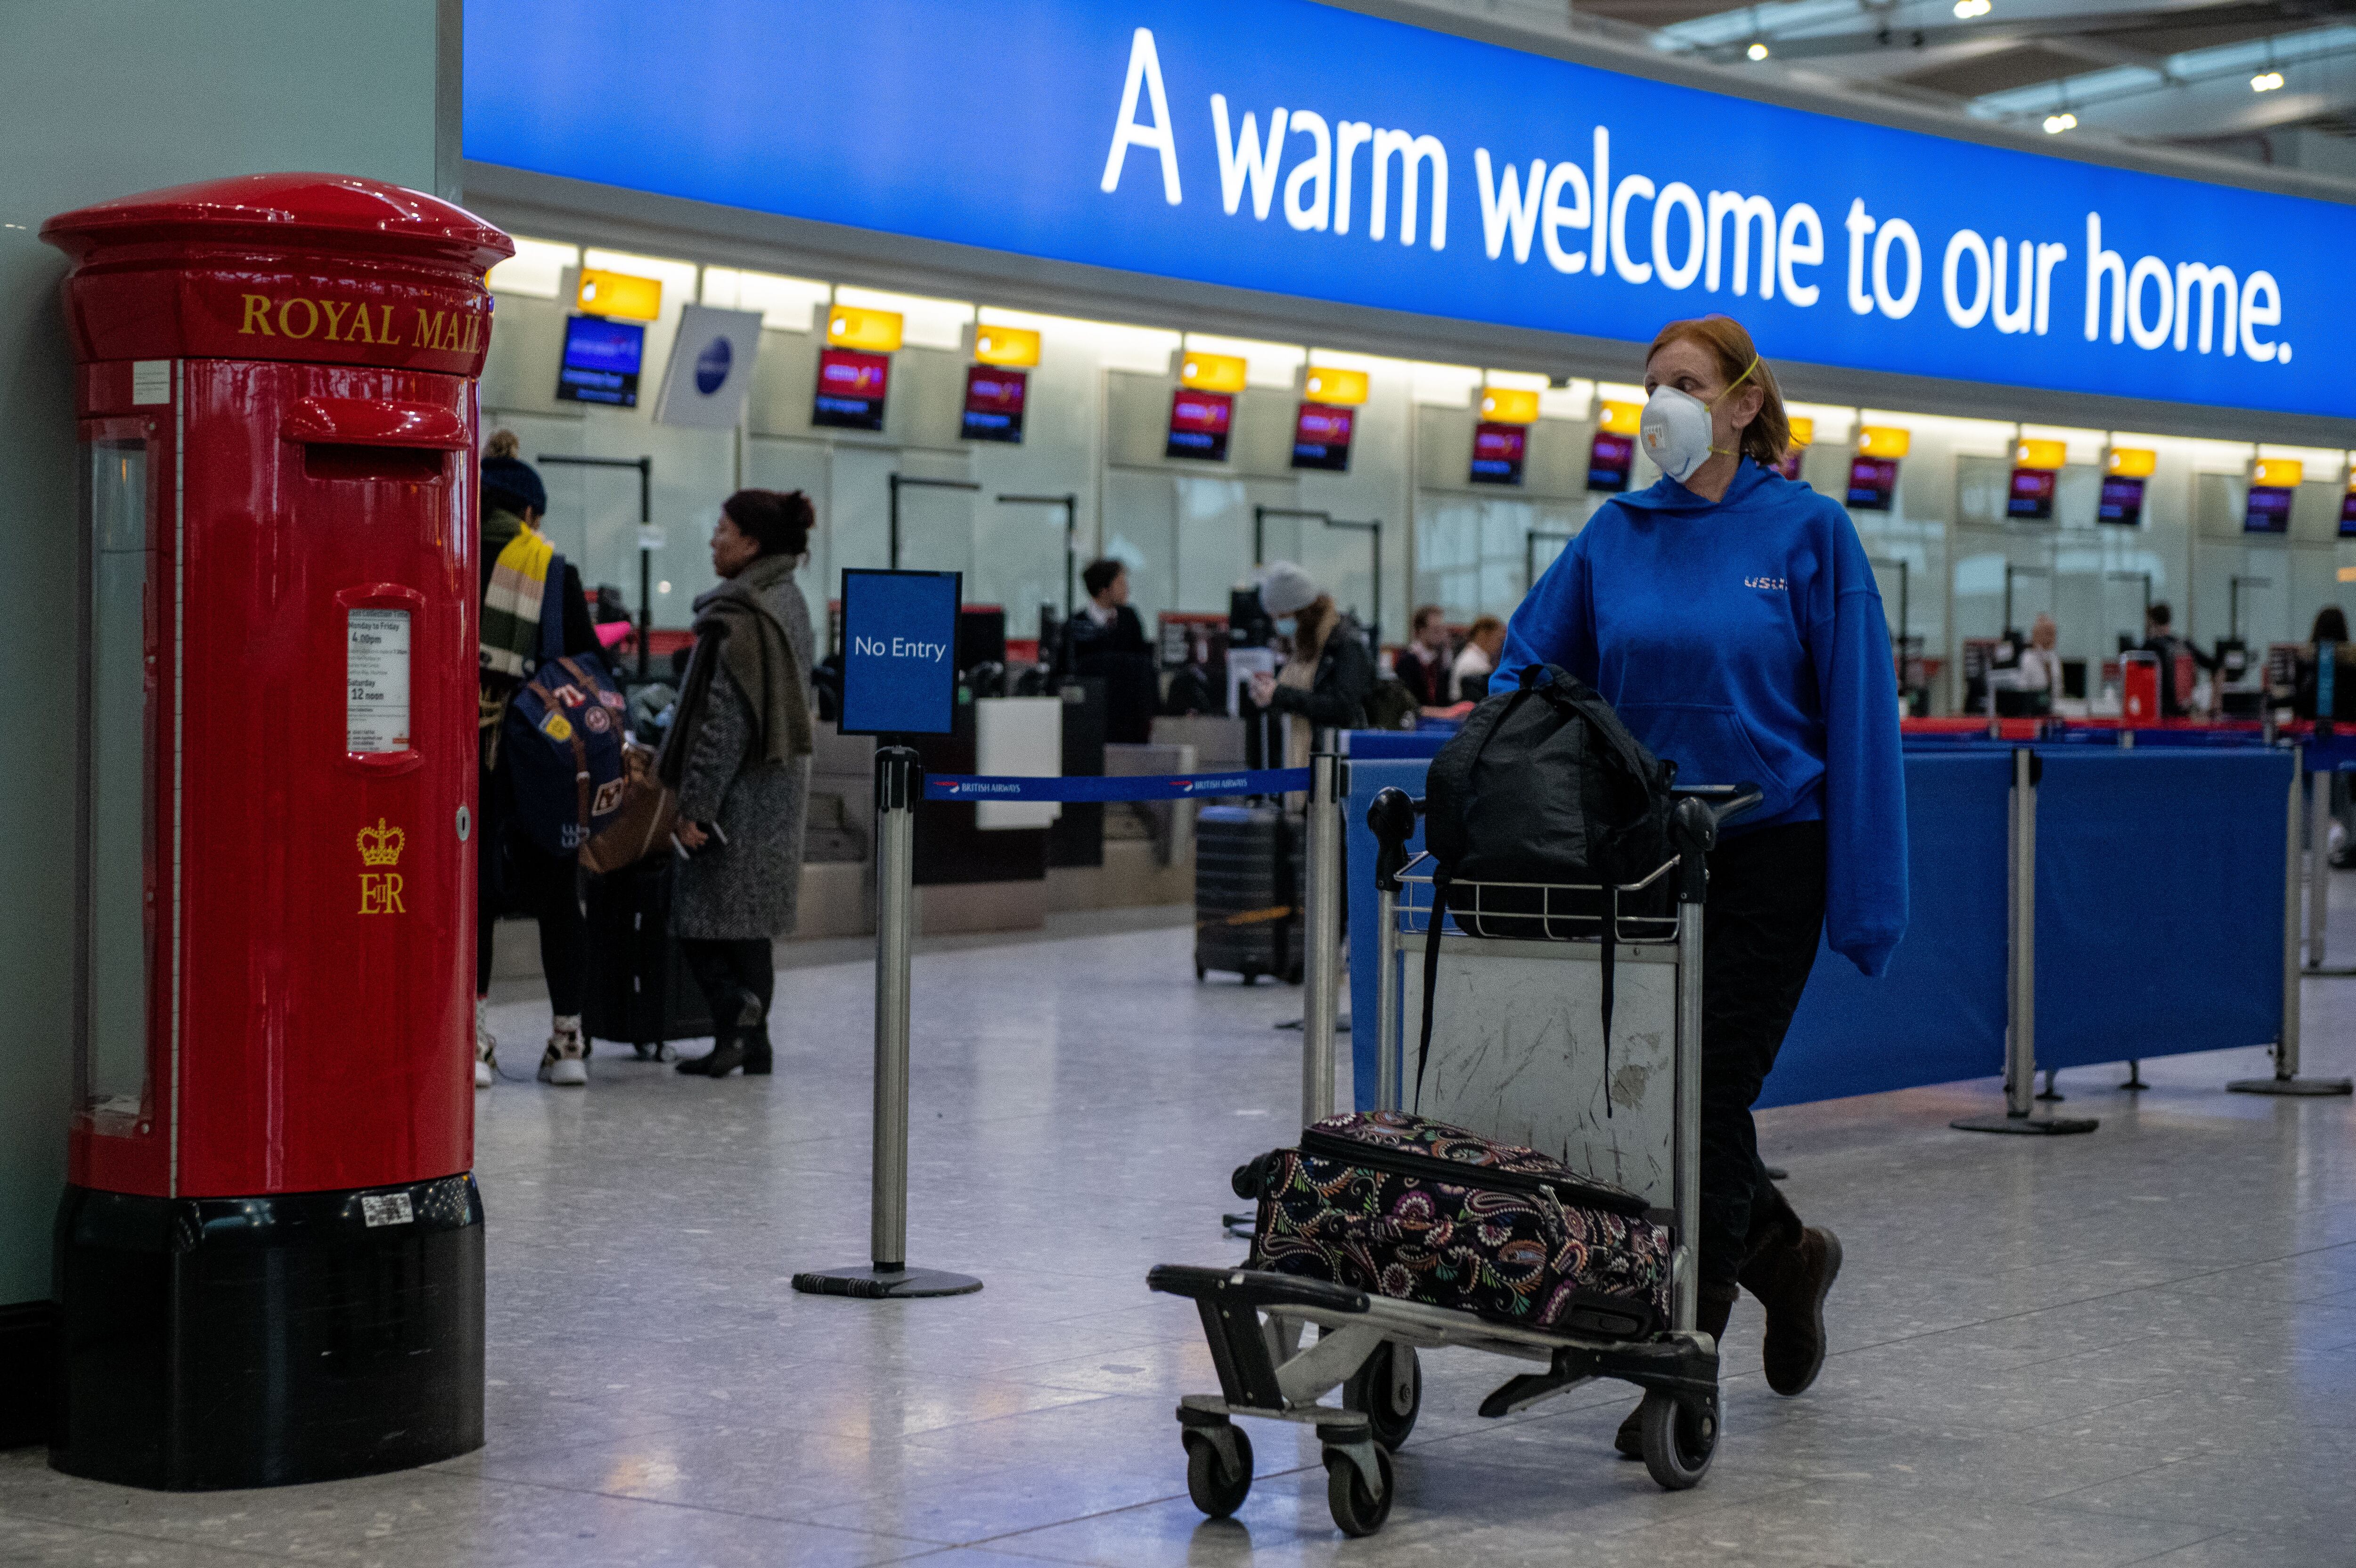 Louis Vuitton comes up with a pop-up store at Heathrow airport's T4